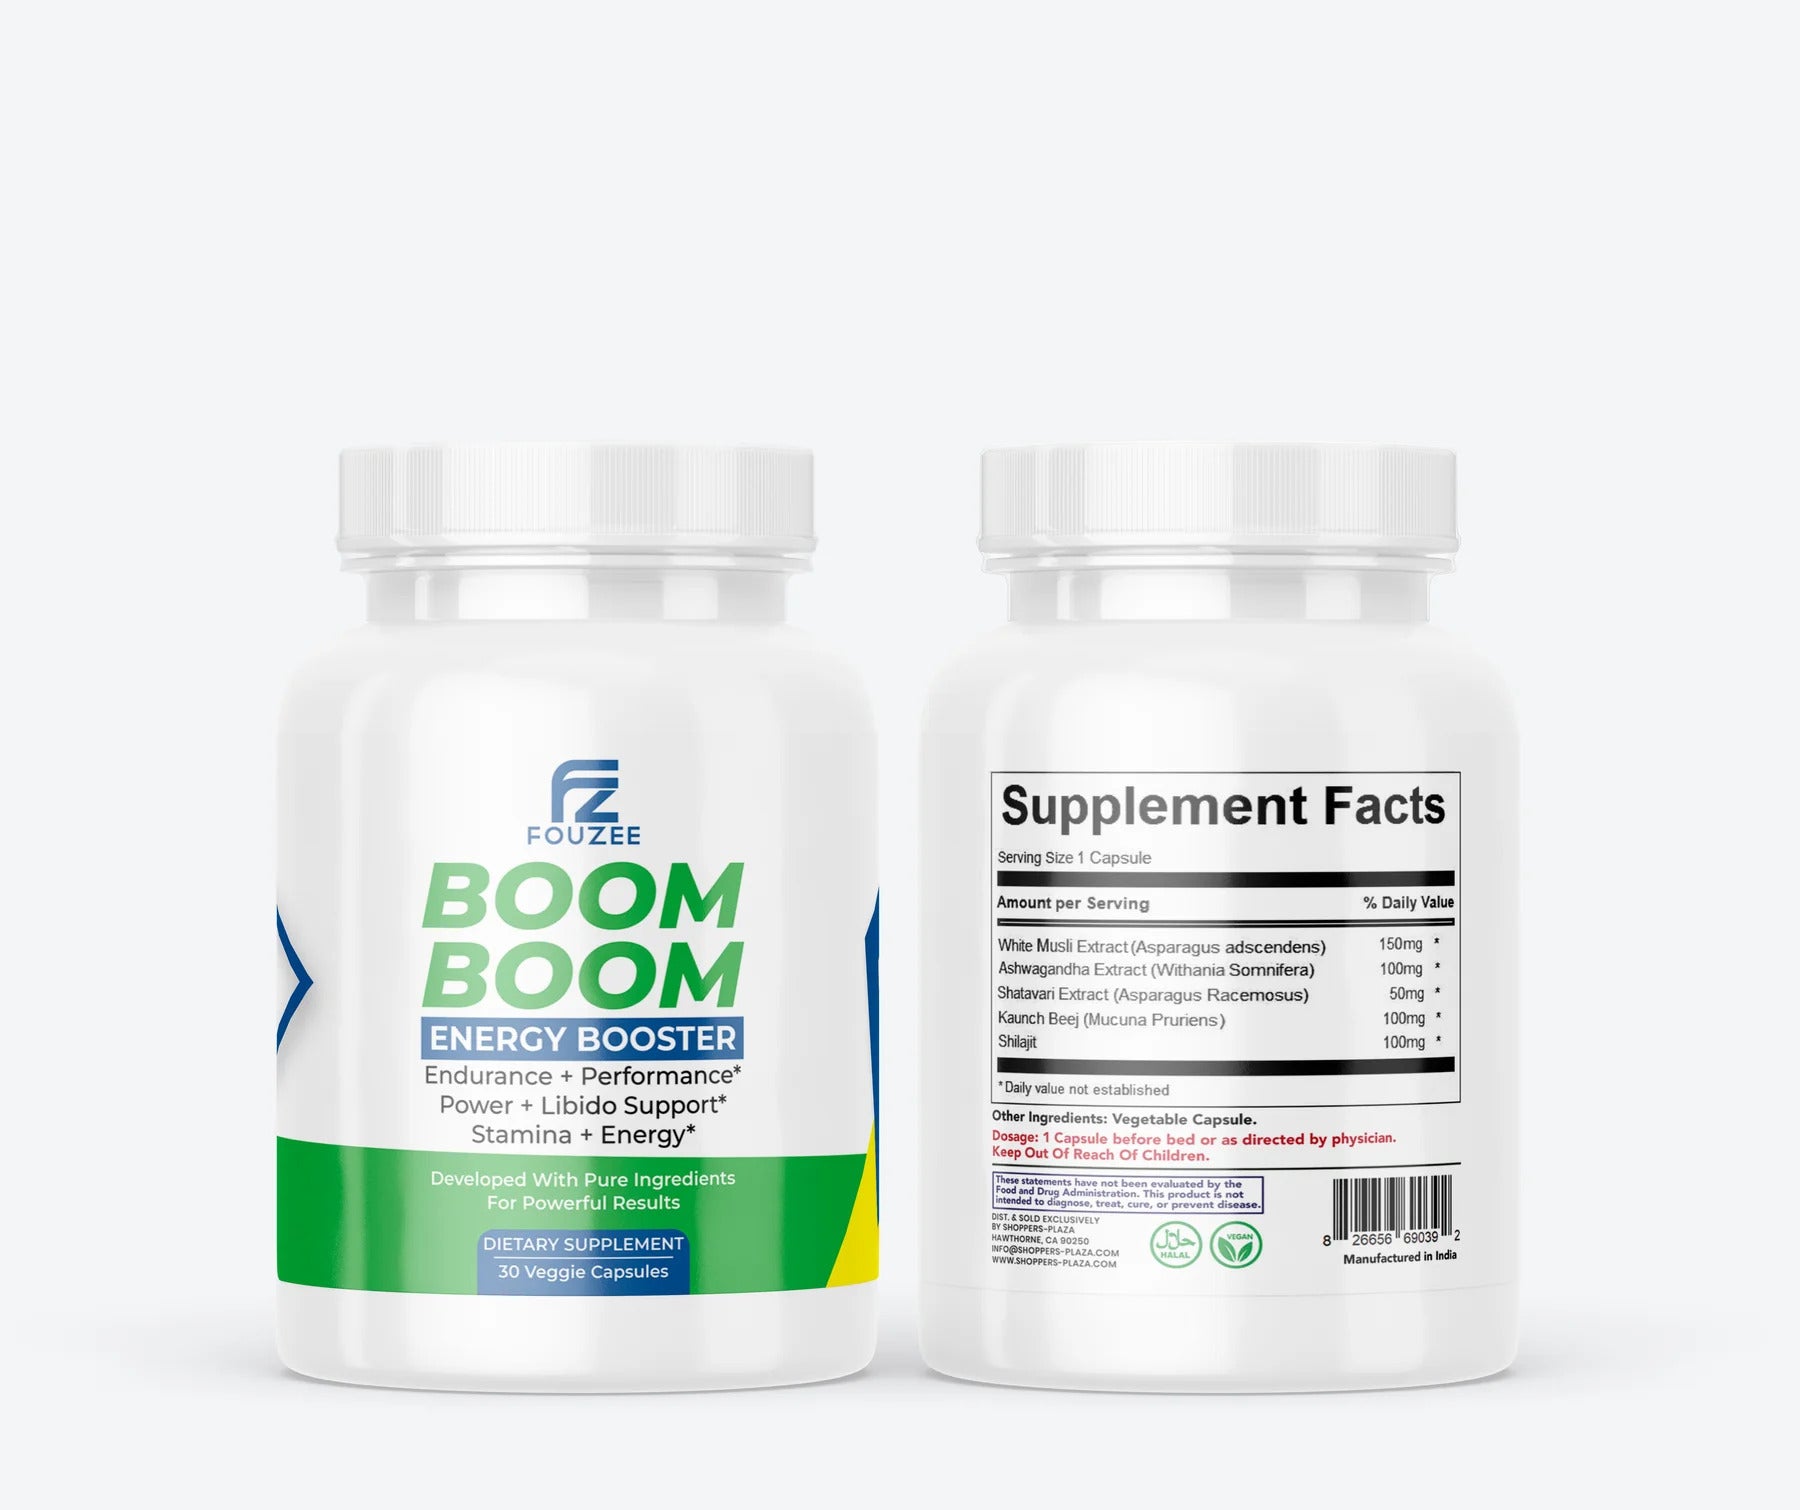 How to Select an Energy Booster Supplement that Works for You?